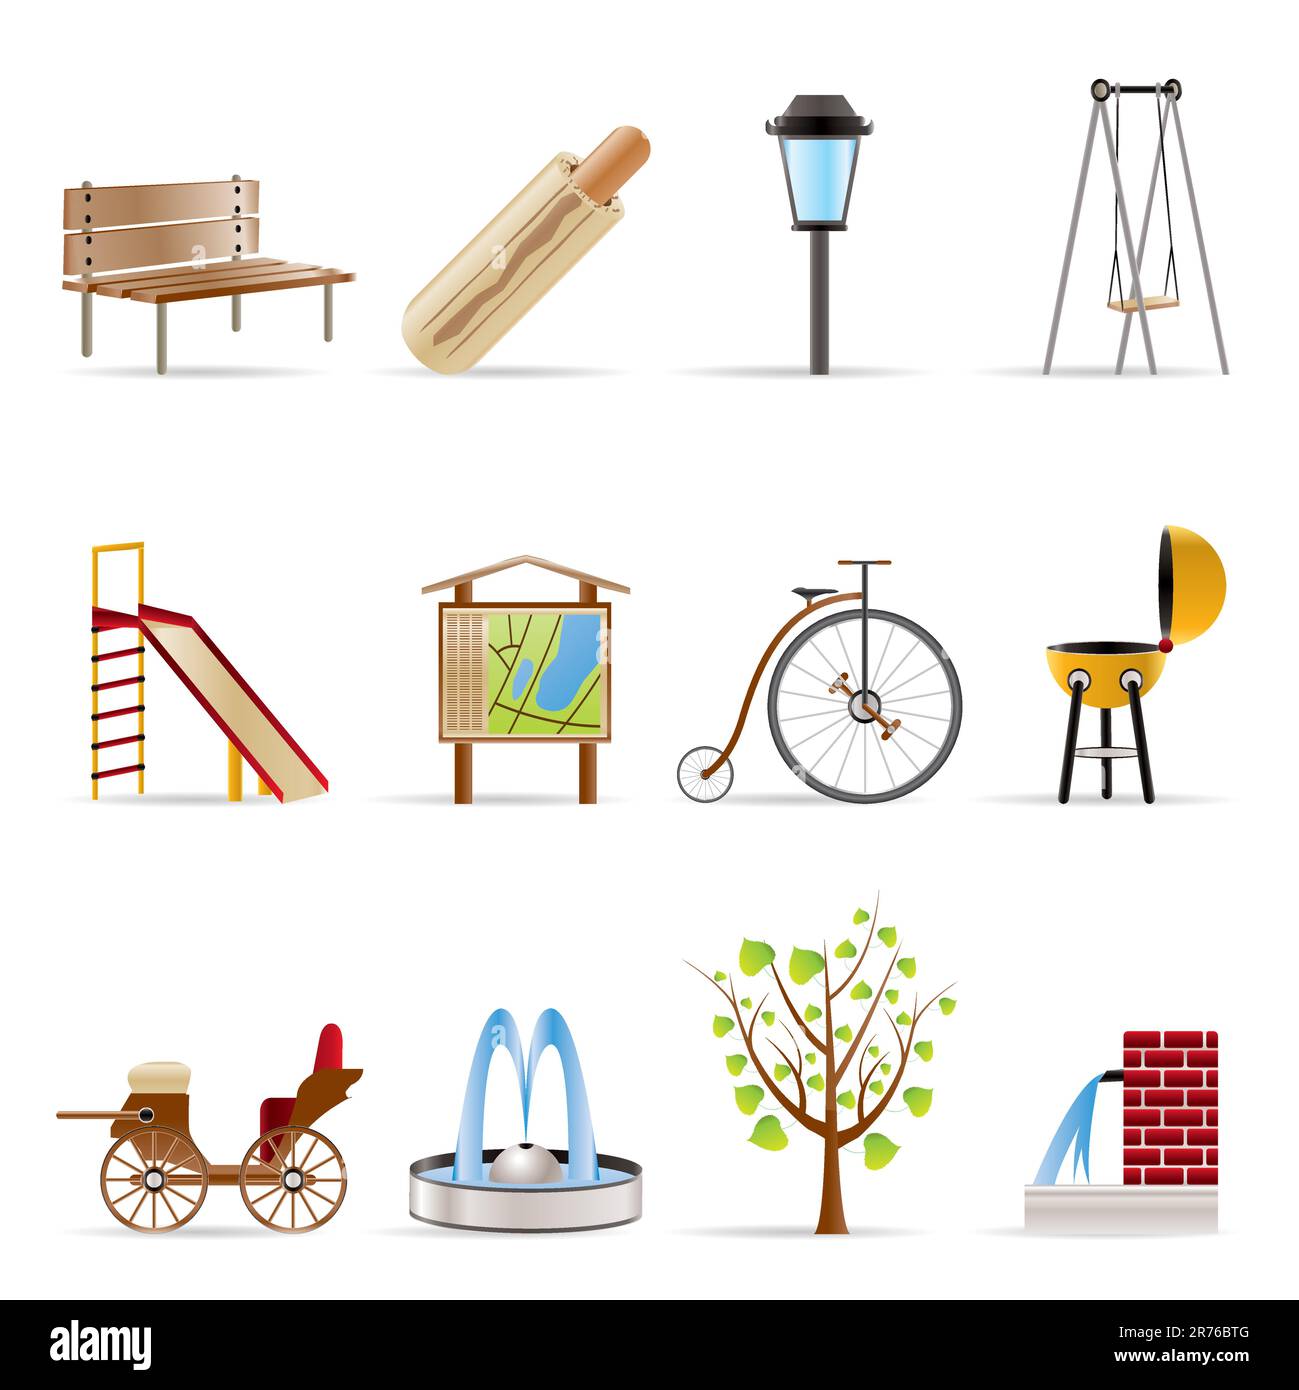 Park objects and signs icon - vector icon set Stock Vector